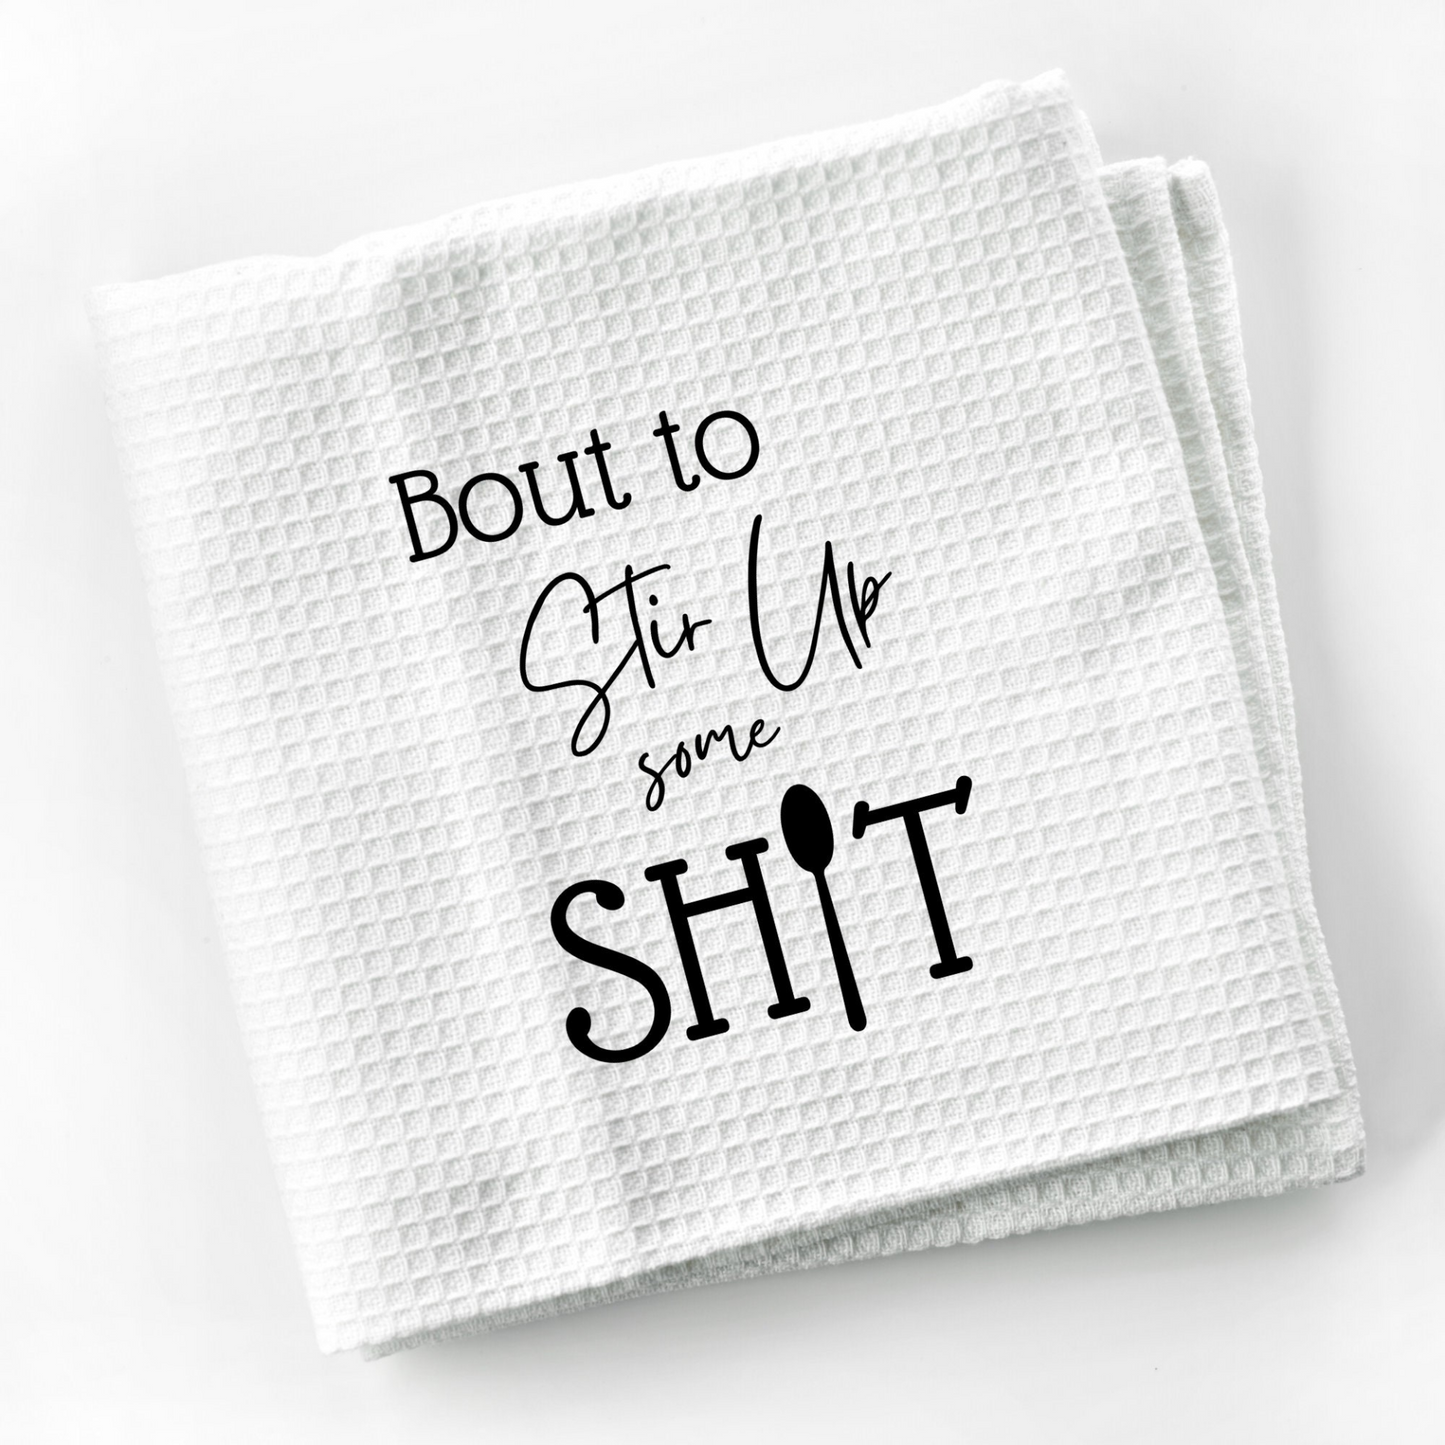 Bout to Stir Up Some Shit Dish Towel | Funny Kitchen Towel with Sarcastic Quote | Decorative Hand Towel for Cook Hostess Gift, Goodies N Stuff